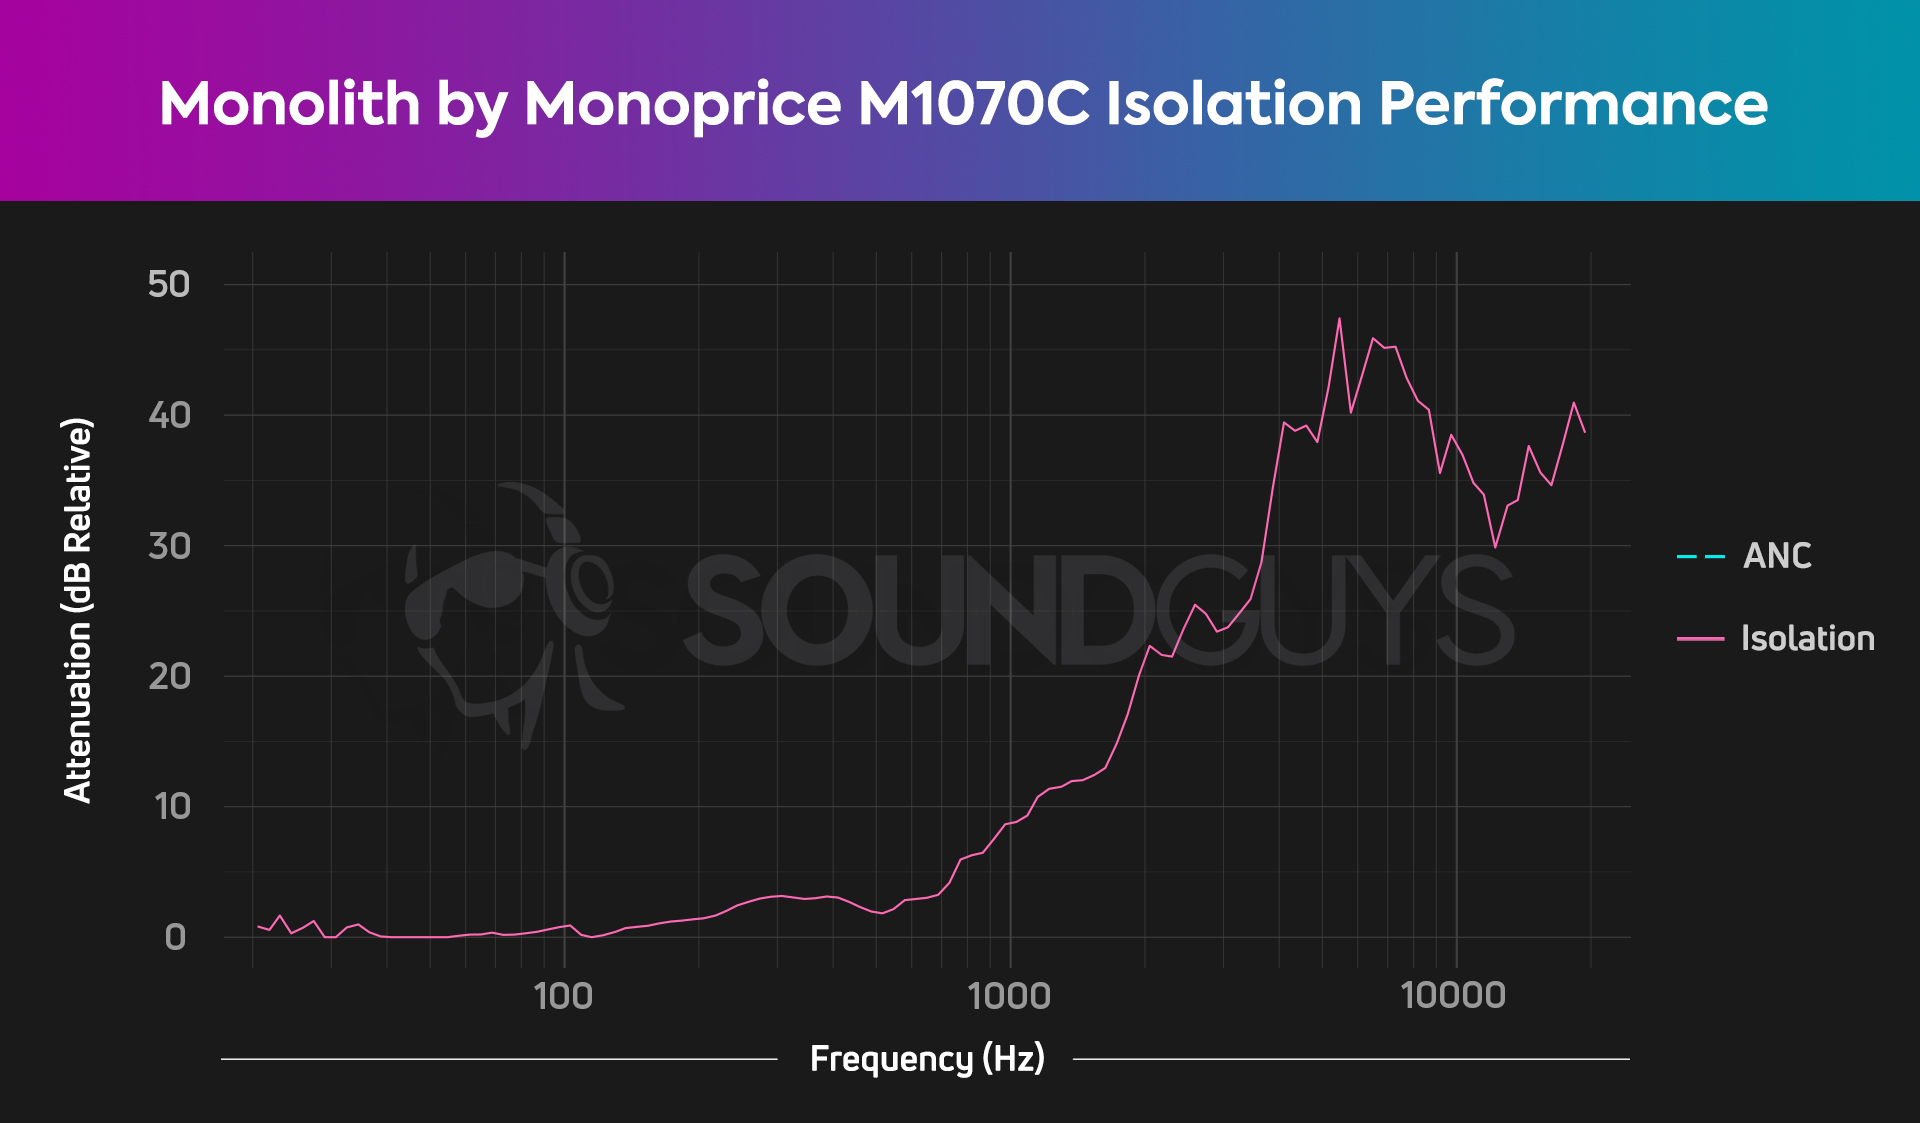 Chart represents the isolation performance of the Monolith by Monoprice M1070C.